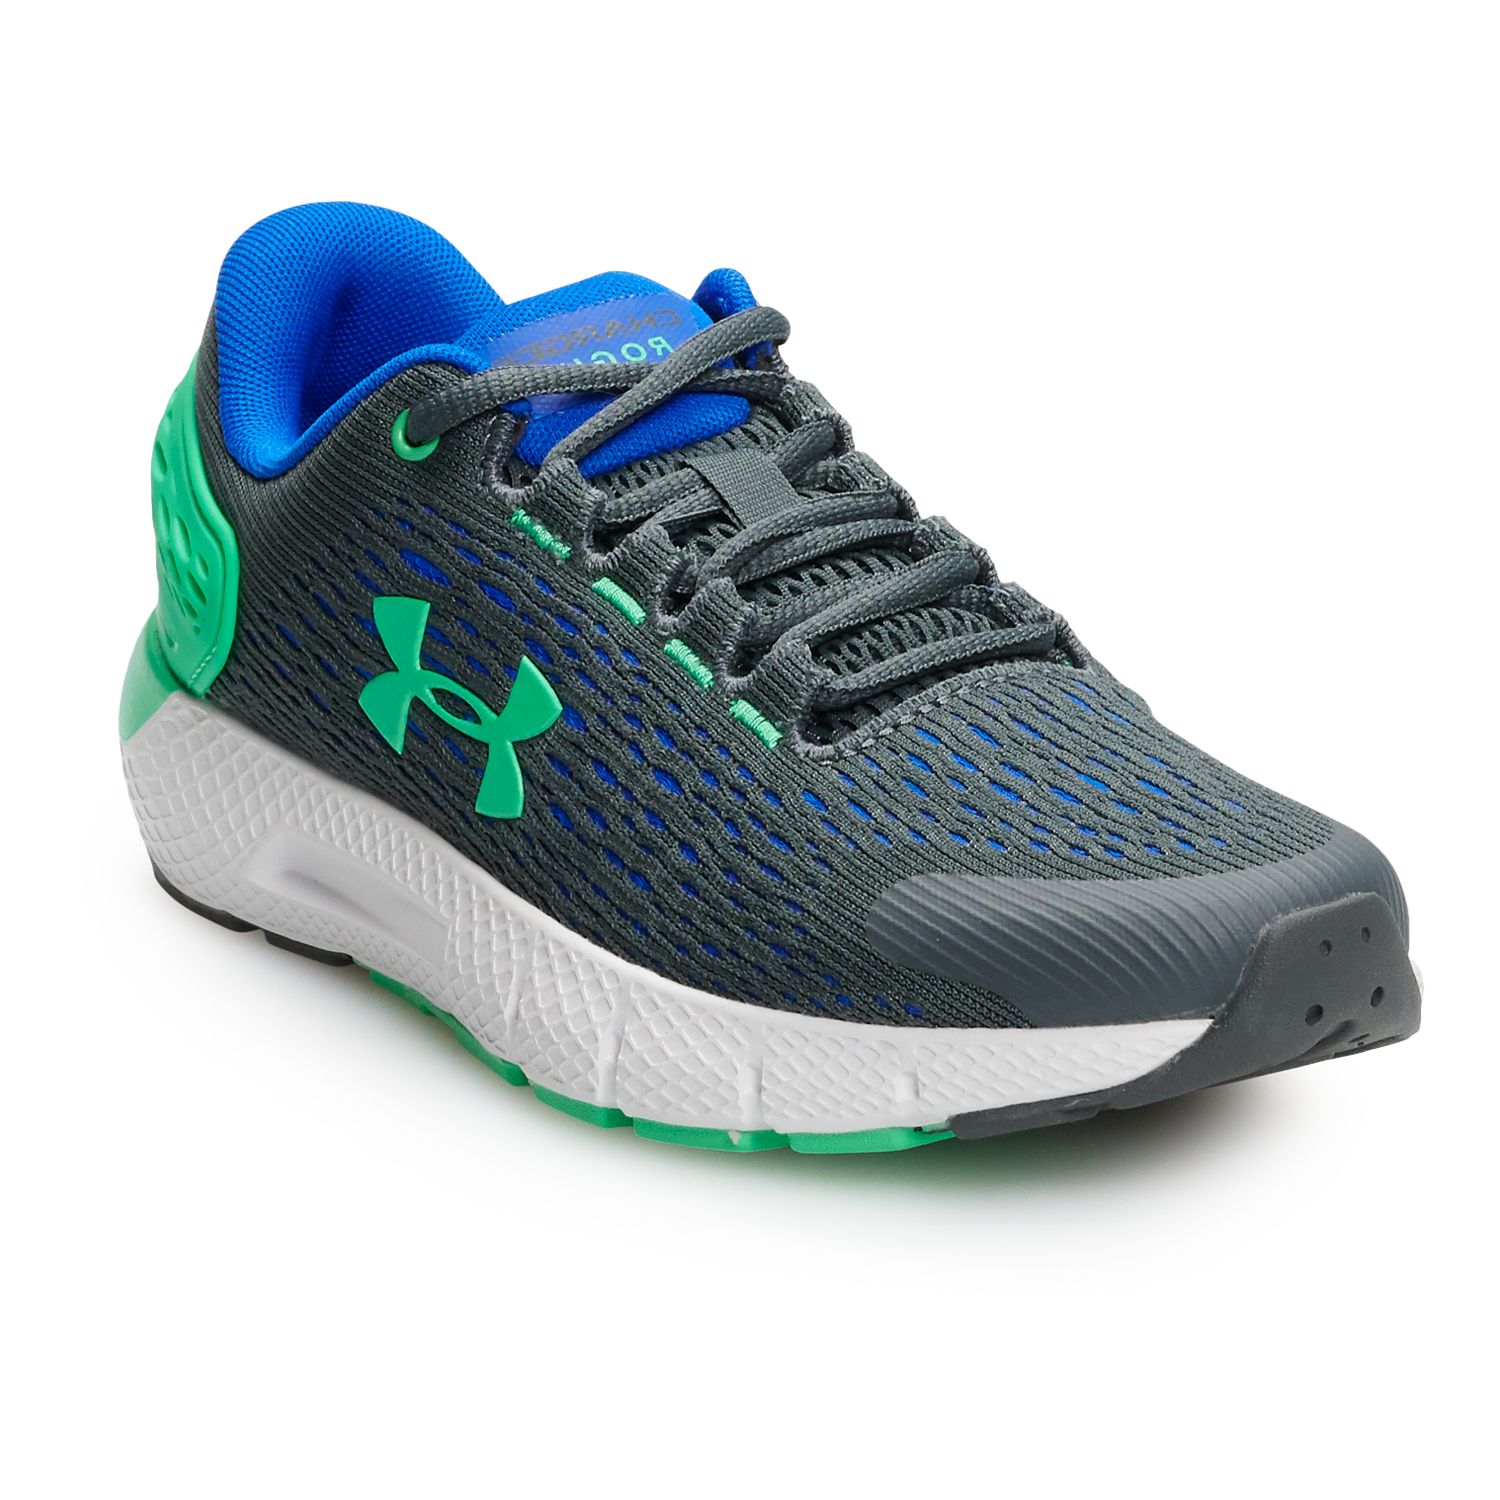 under armour youth shoes sale